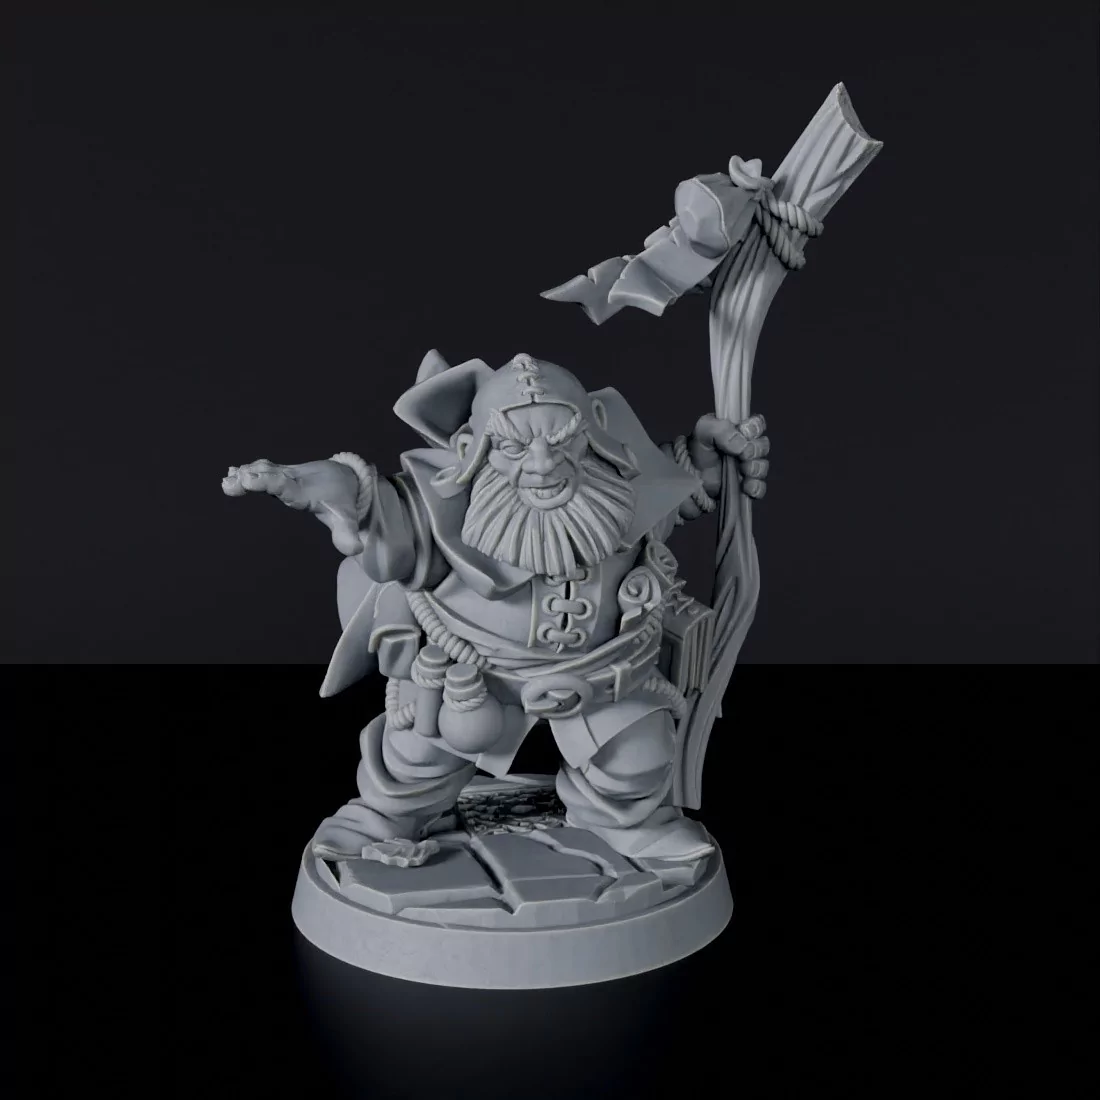 Miniature of Dwarf Male Druid ver. 2 - warlock with staff and cloak for fantasy tabletop role-playing games